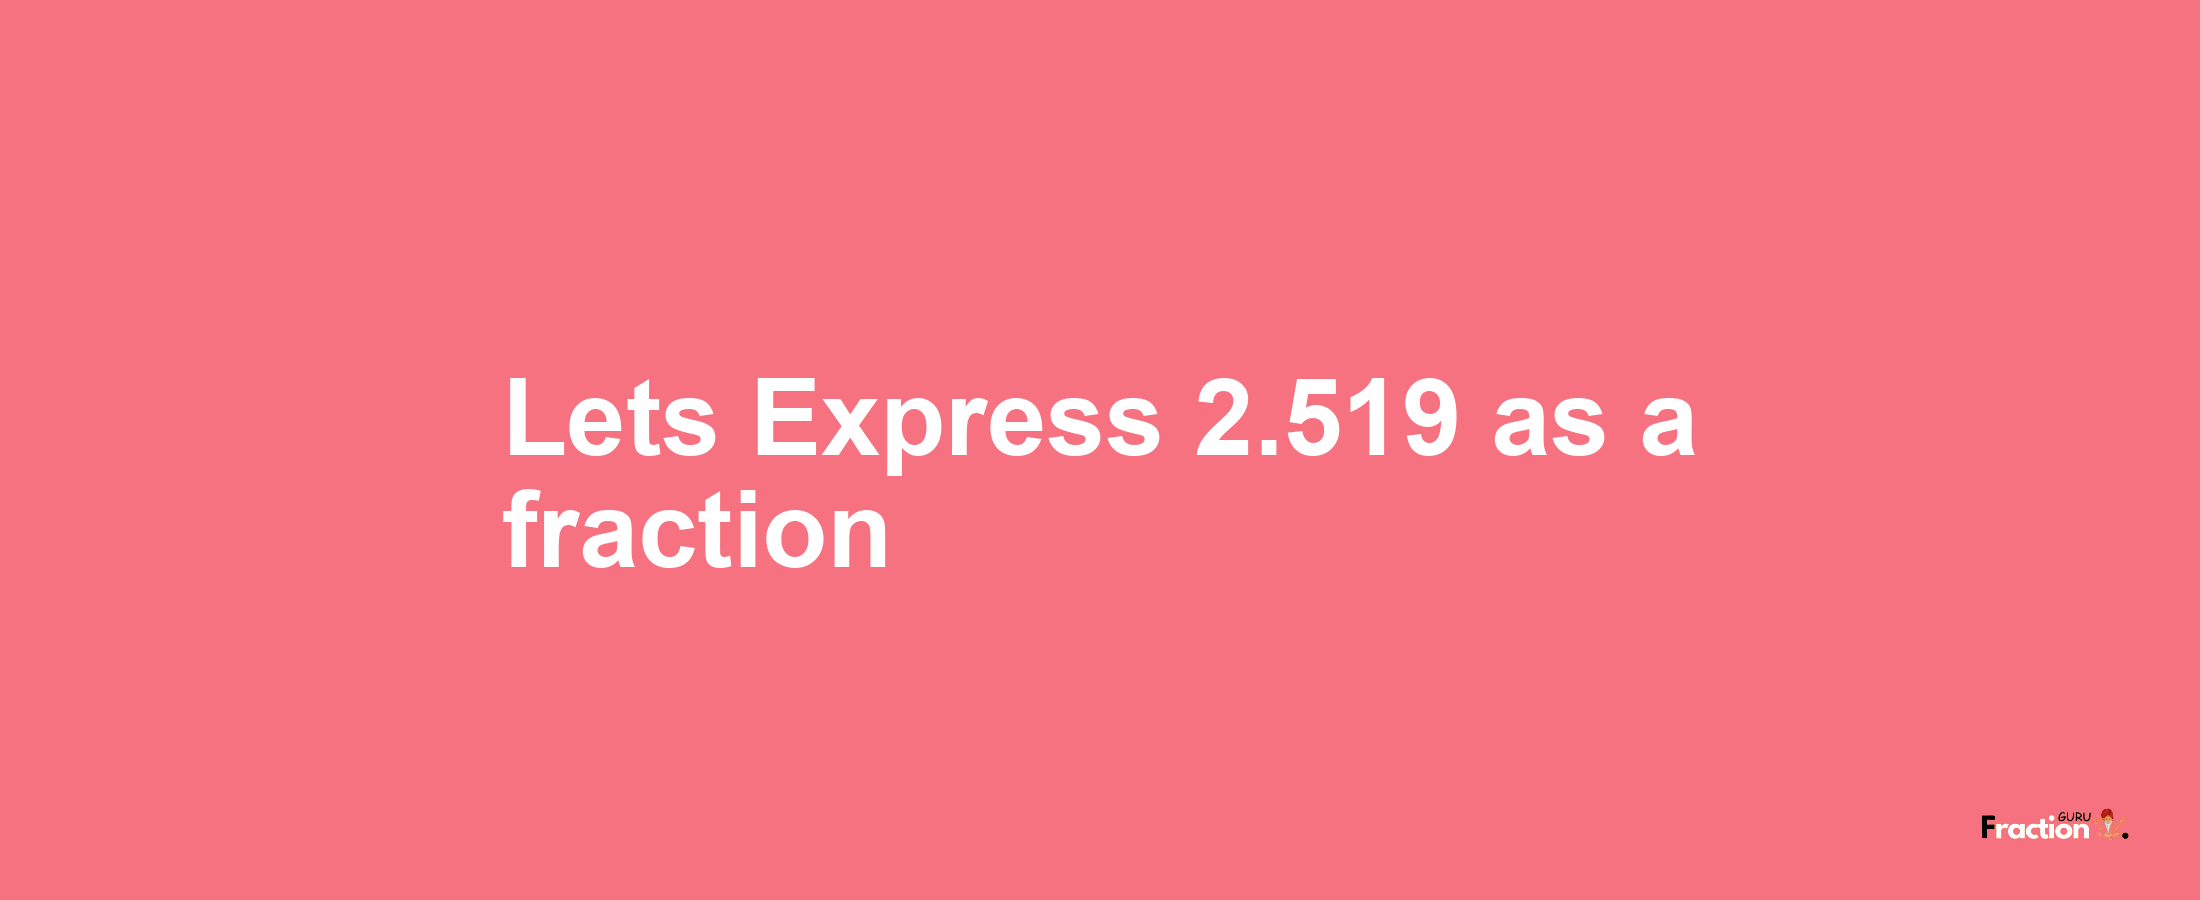 Lets Express 2.519 as afraction